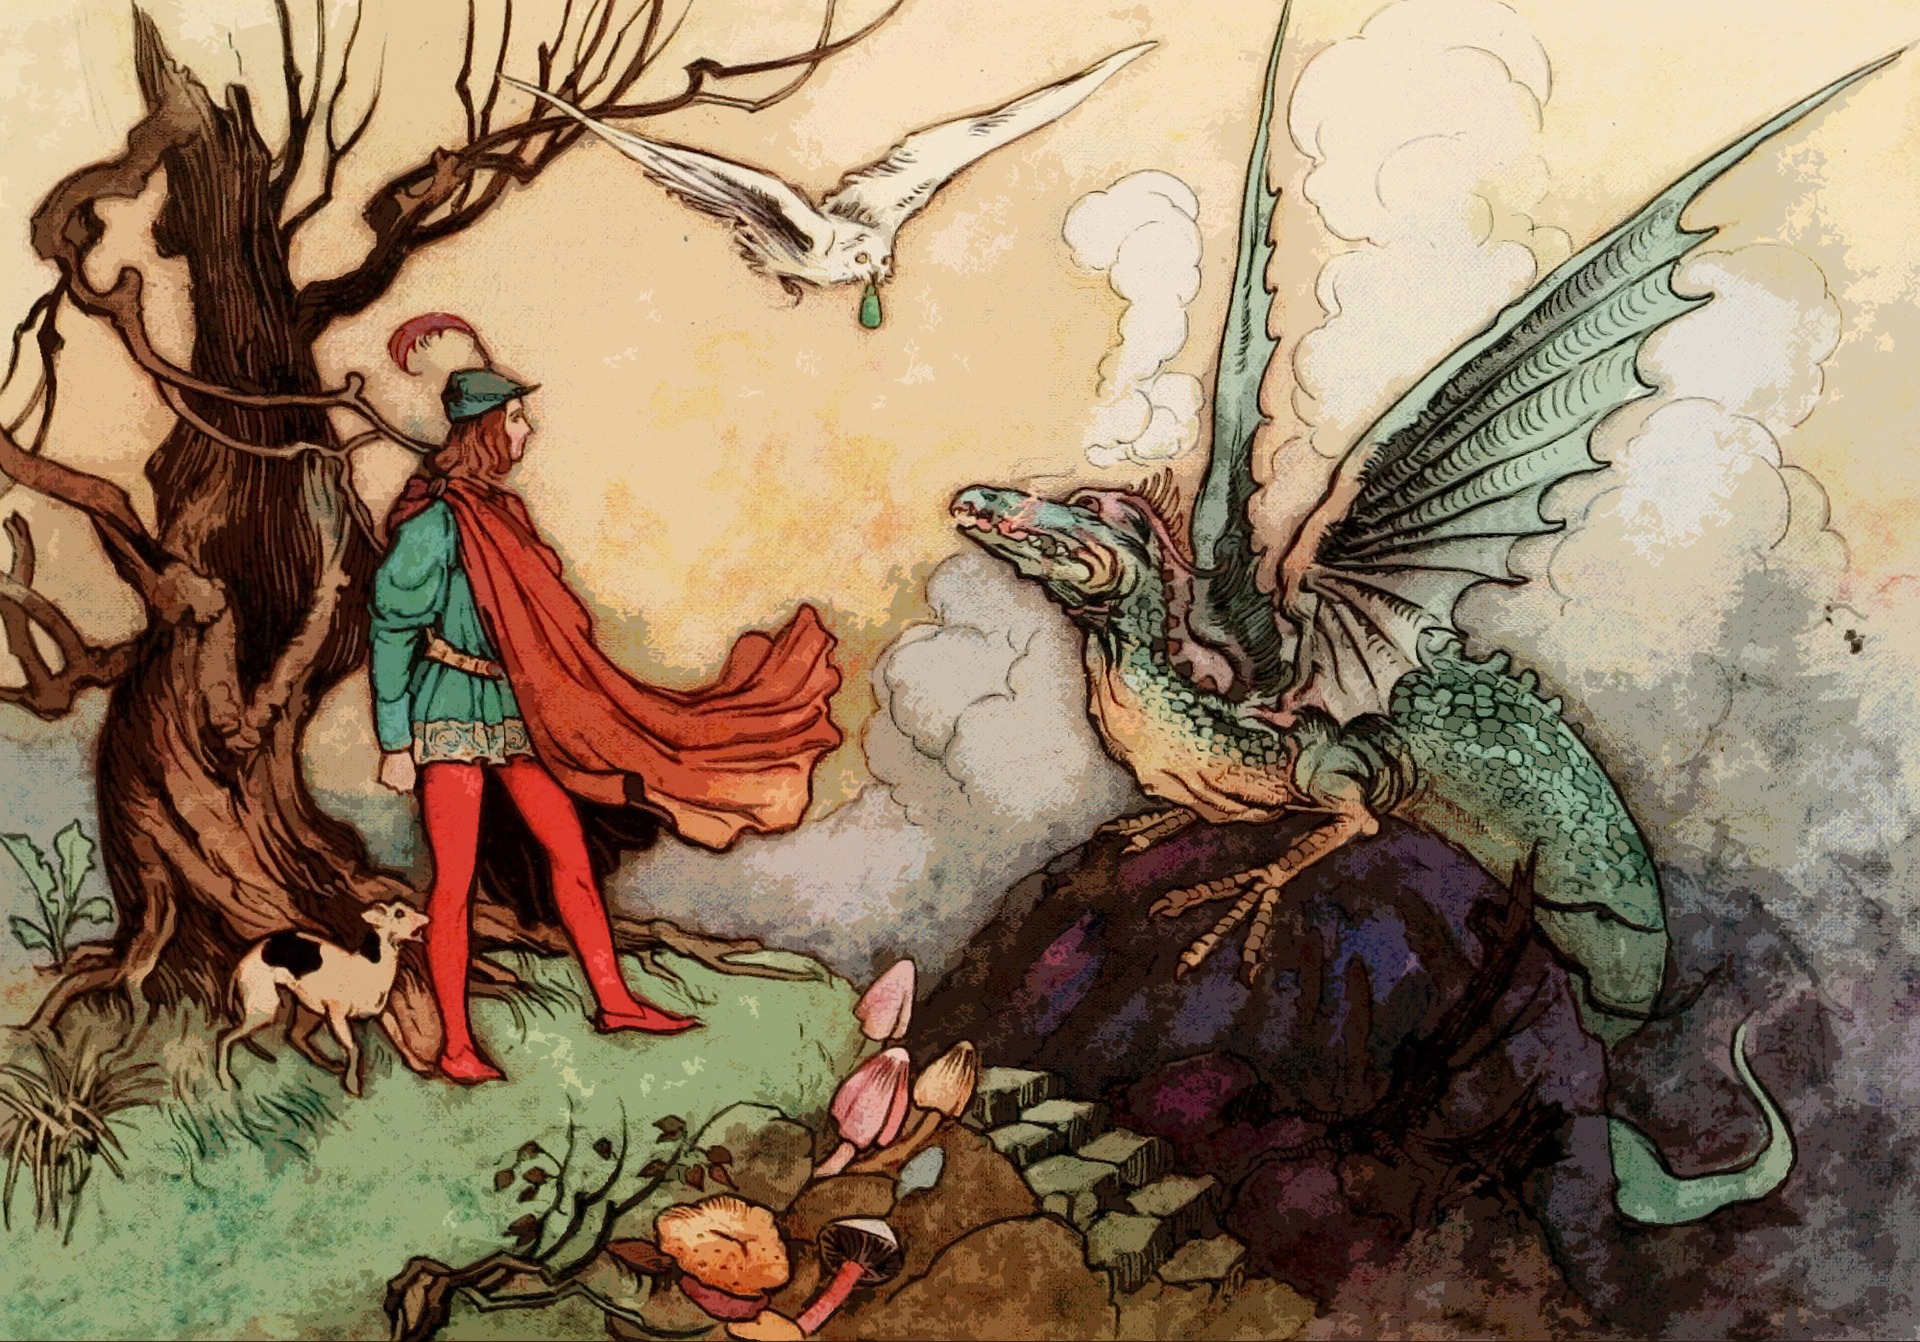 Old charming, enchanted fairy tale illustration of man facing dragon